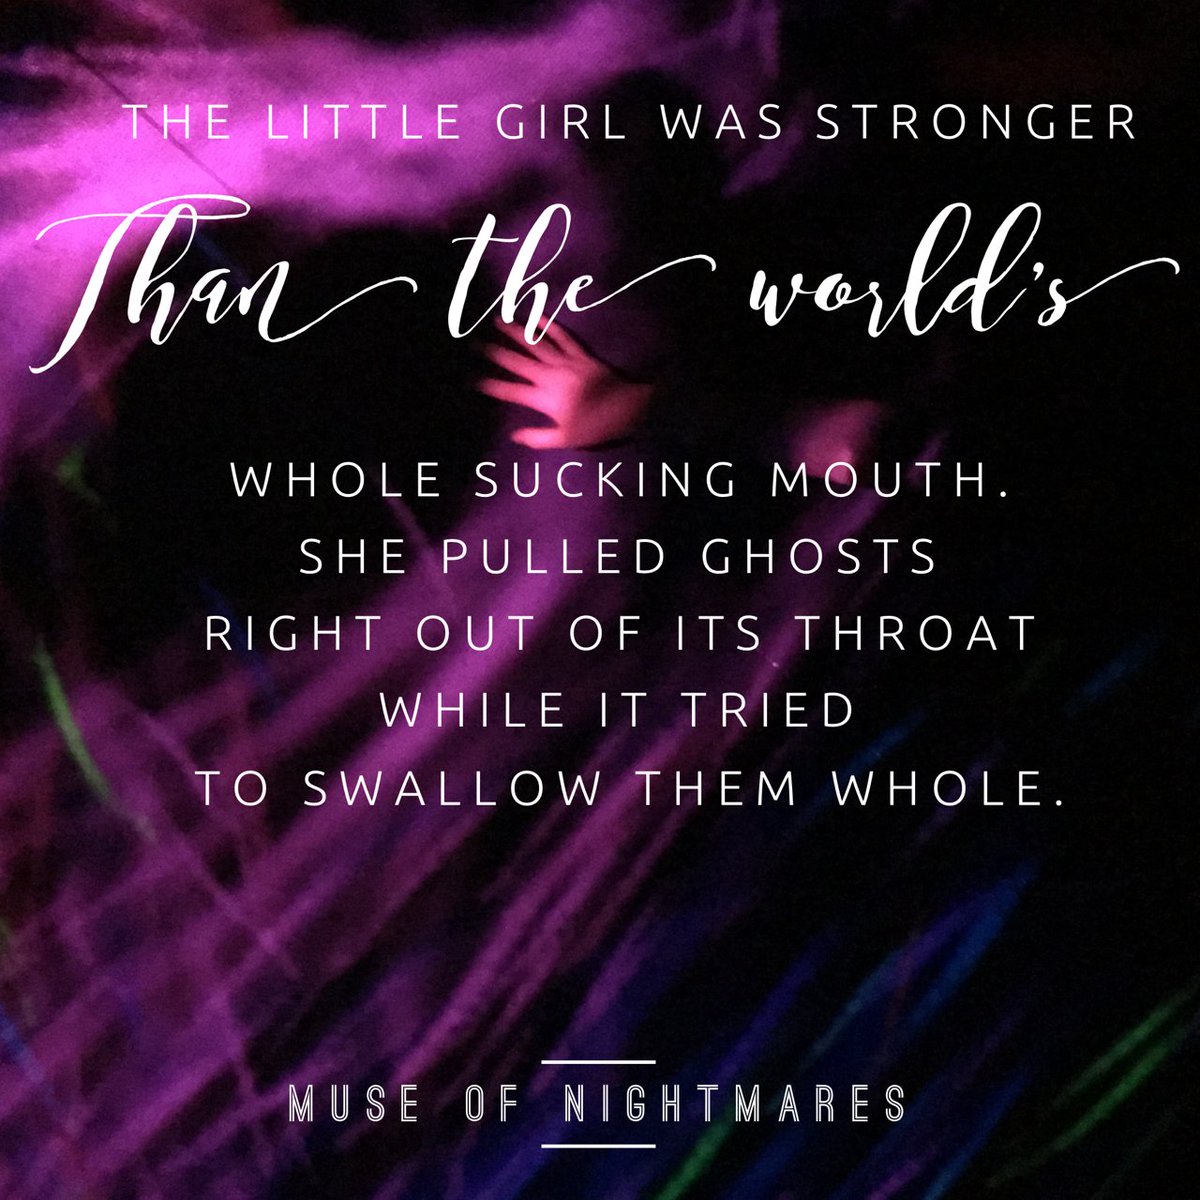 Laini Taylor on Twitter: "25 days till MUSE OF NIGHTMARES ...